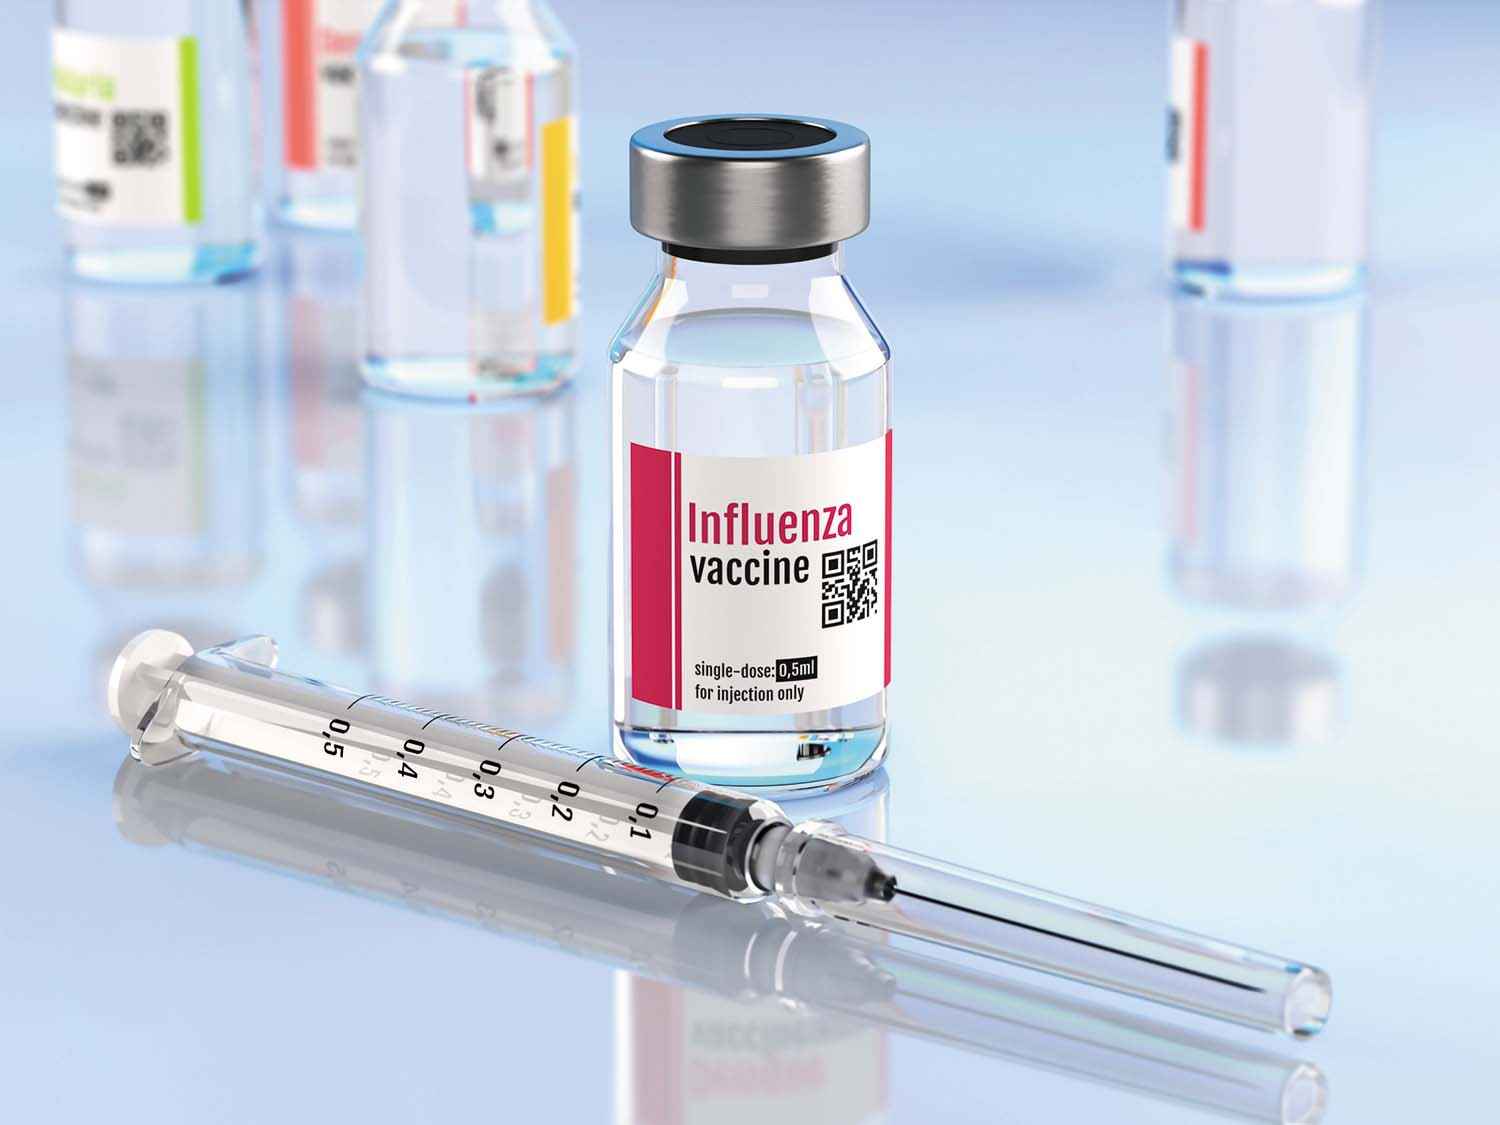 photo of a vial of influenza vaccine with a syringe laid alongside it on a reflective counter surface